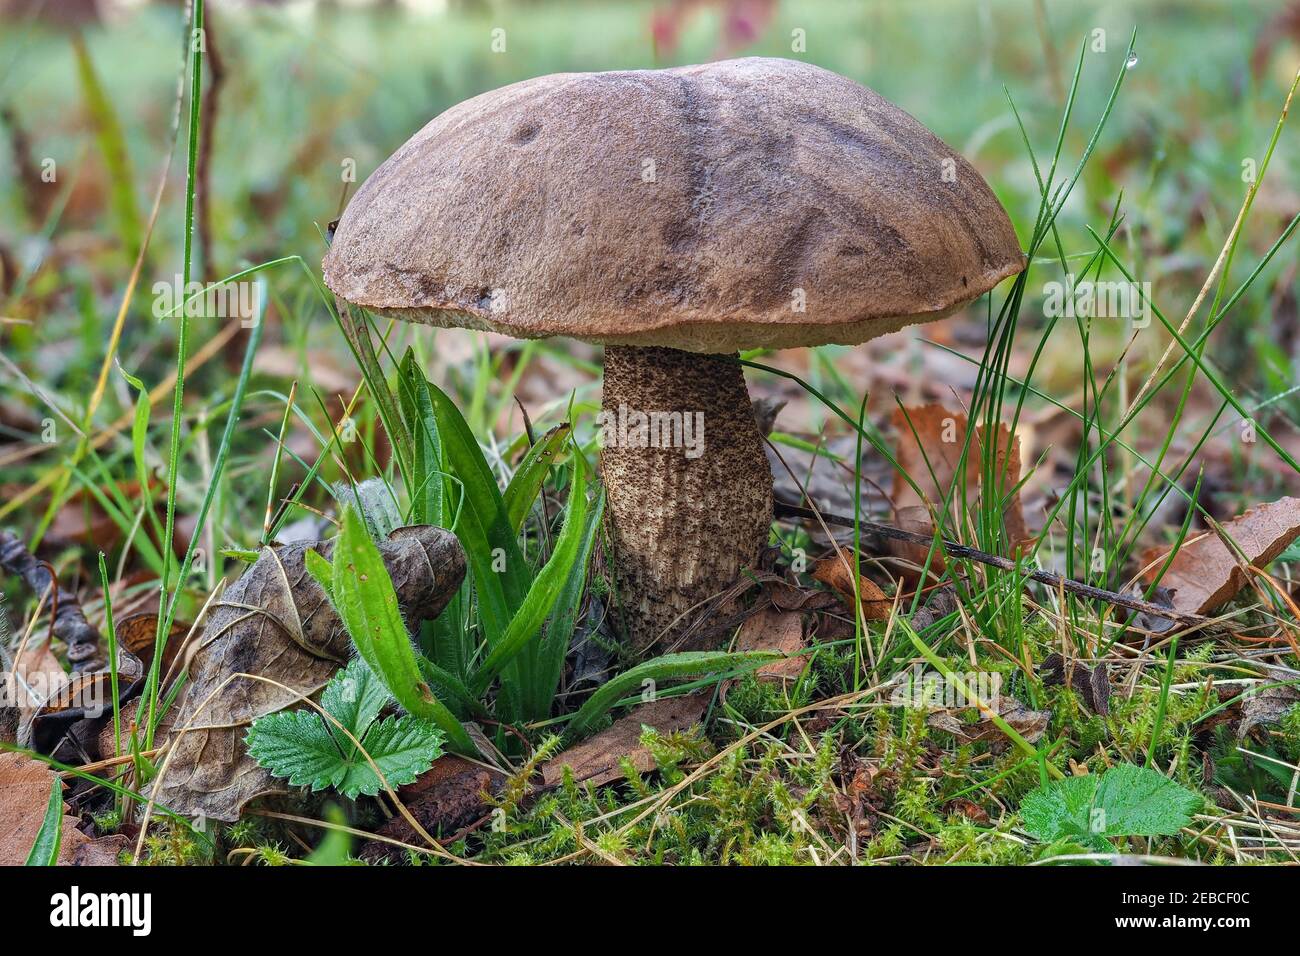 Leccinum scabrum, commonly known as the rough-stemmed bolete, scaber stalk, and birch bolete, is an edible mushroom in the family Boletaceae. , an int Stock Photo